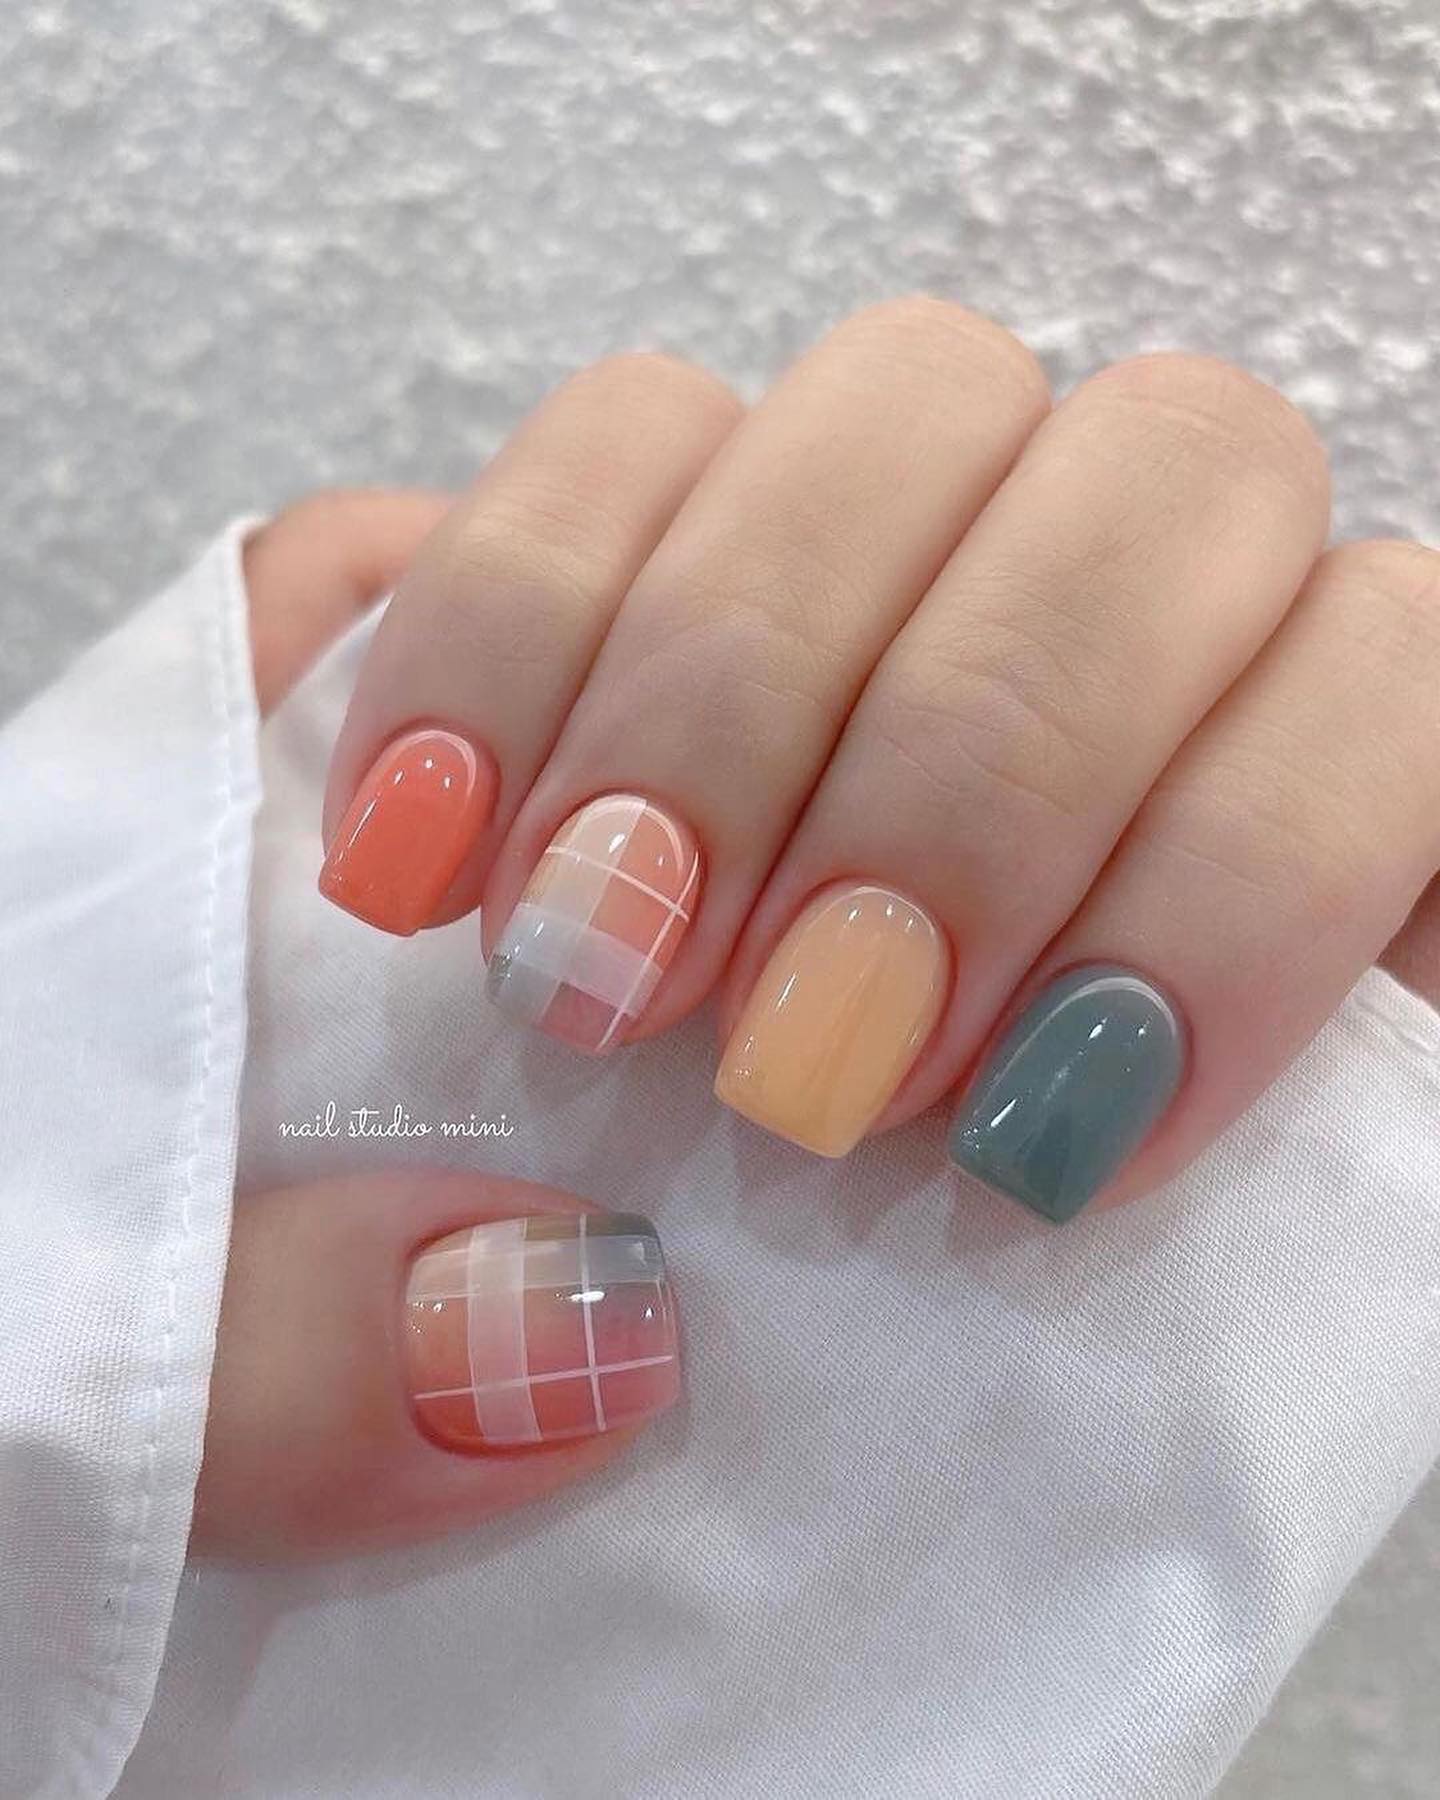 100 Of The Best Spring Inspired Nail Designs images 51